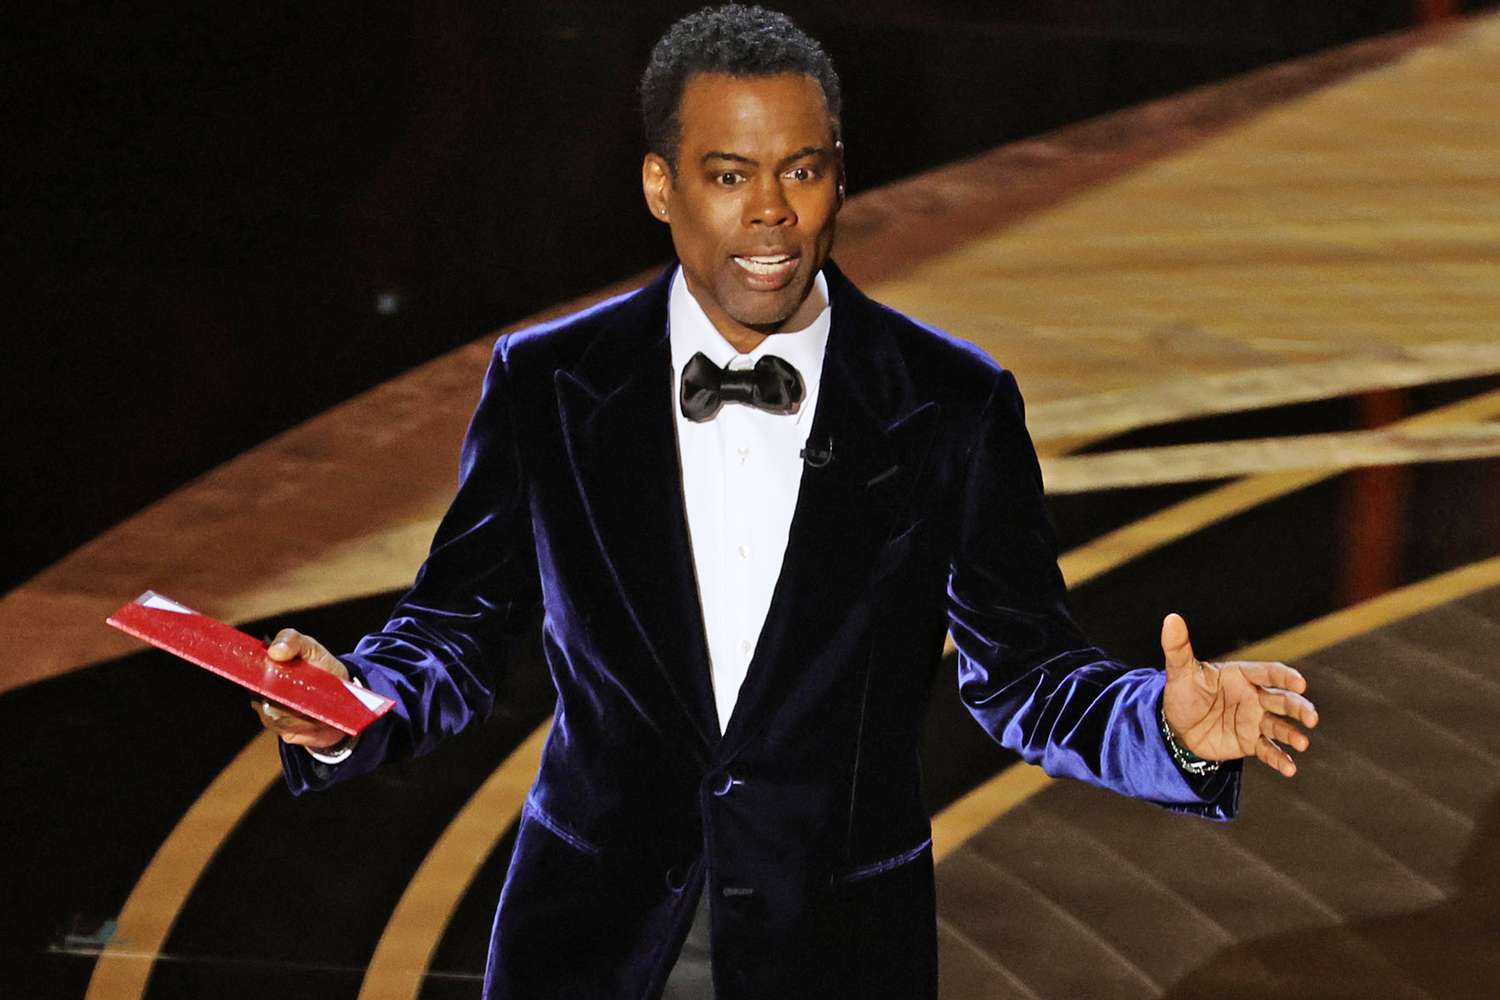 HOLLYWOOD, CALIFORNIA - MARCH 27: Chris Rock speaks onstage during the 94th Annual Academy Awards at Dolby Theatre on March 27, 2022 in Hollywood, California. (Photo by Neilson Barnard/Getty Images)